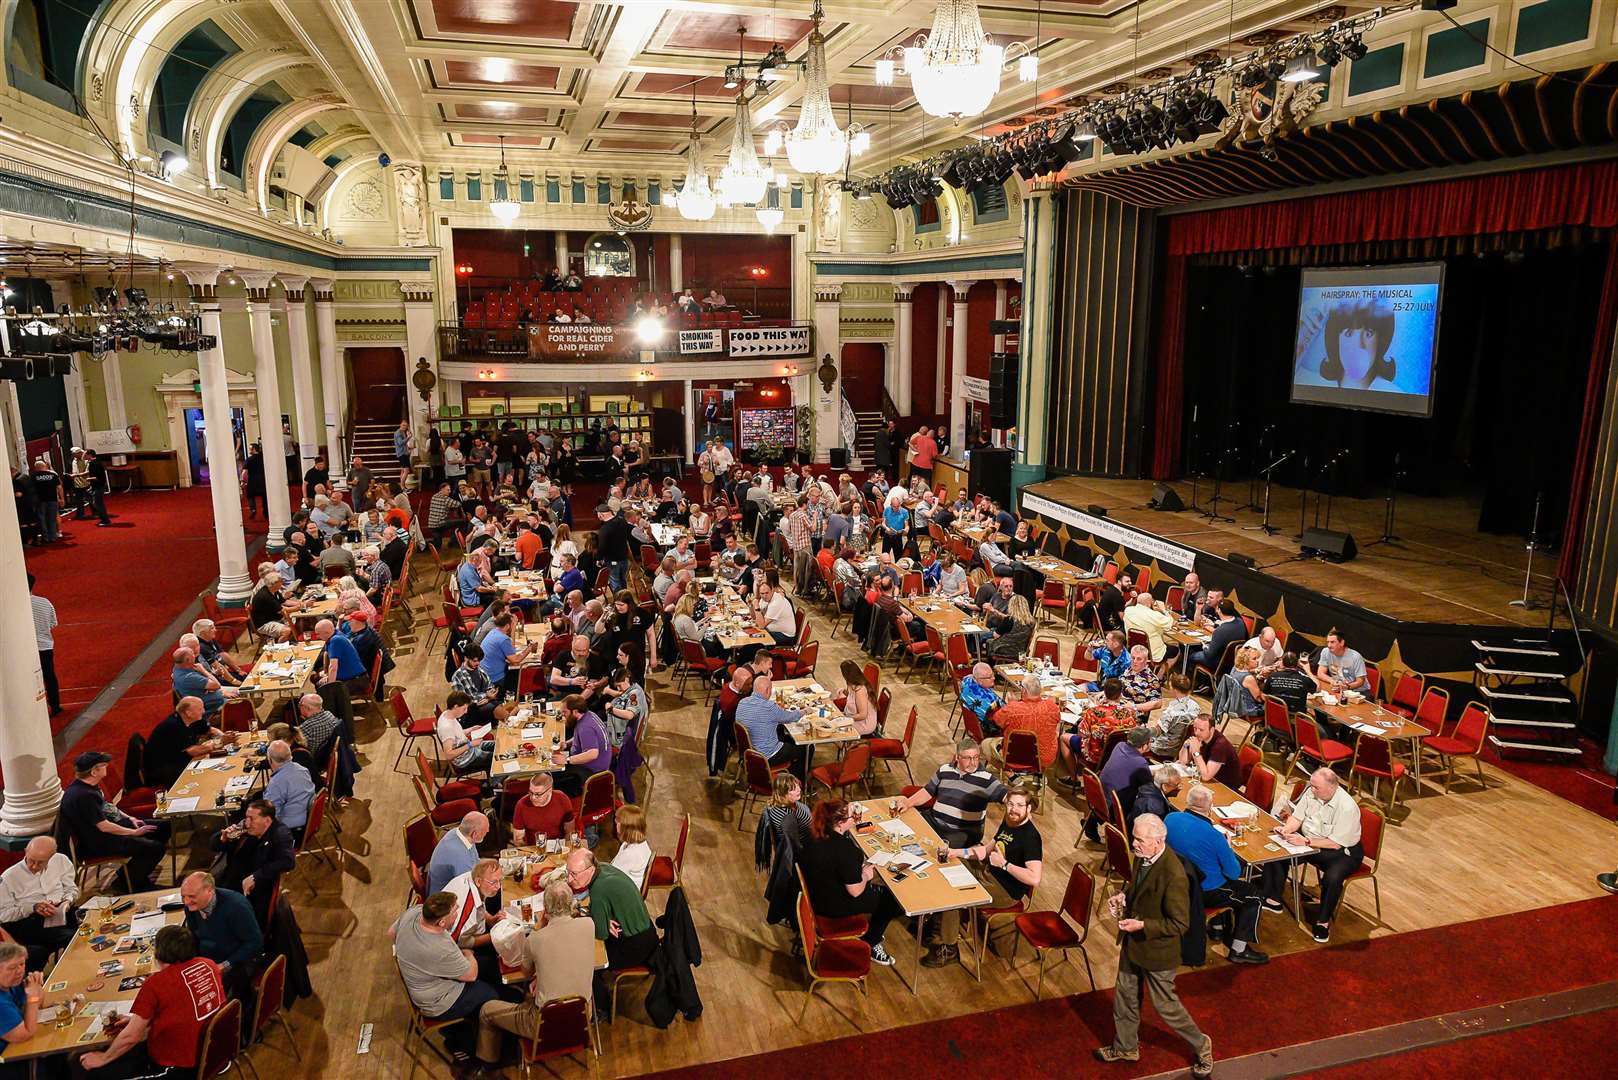 The beer festival at Margate's Winter Gardens returns after being called off for the last two years due to the pandemic